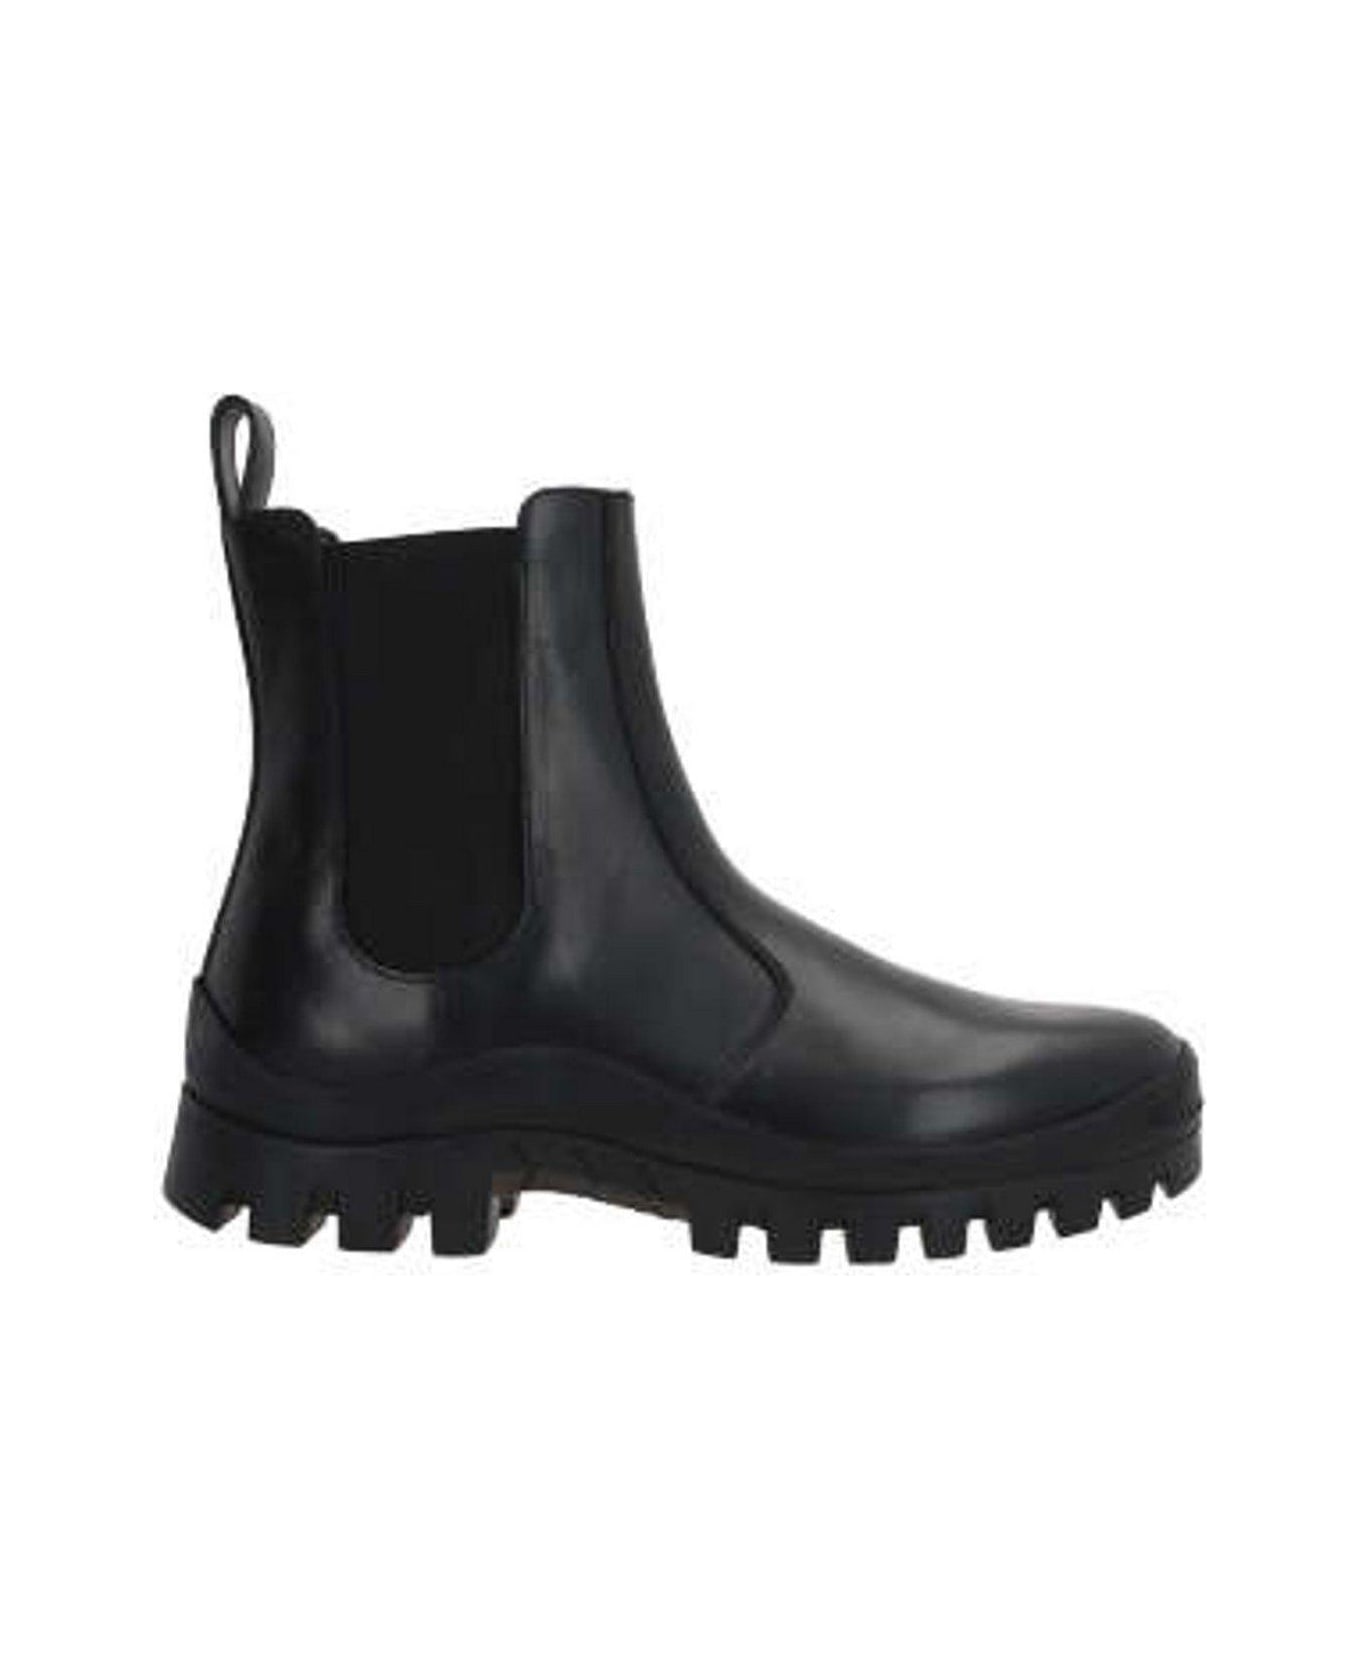 The Row Round Toe Ankle Boots - BLK BLACK ブーツ